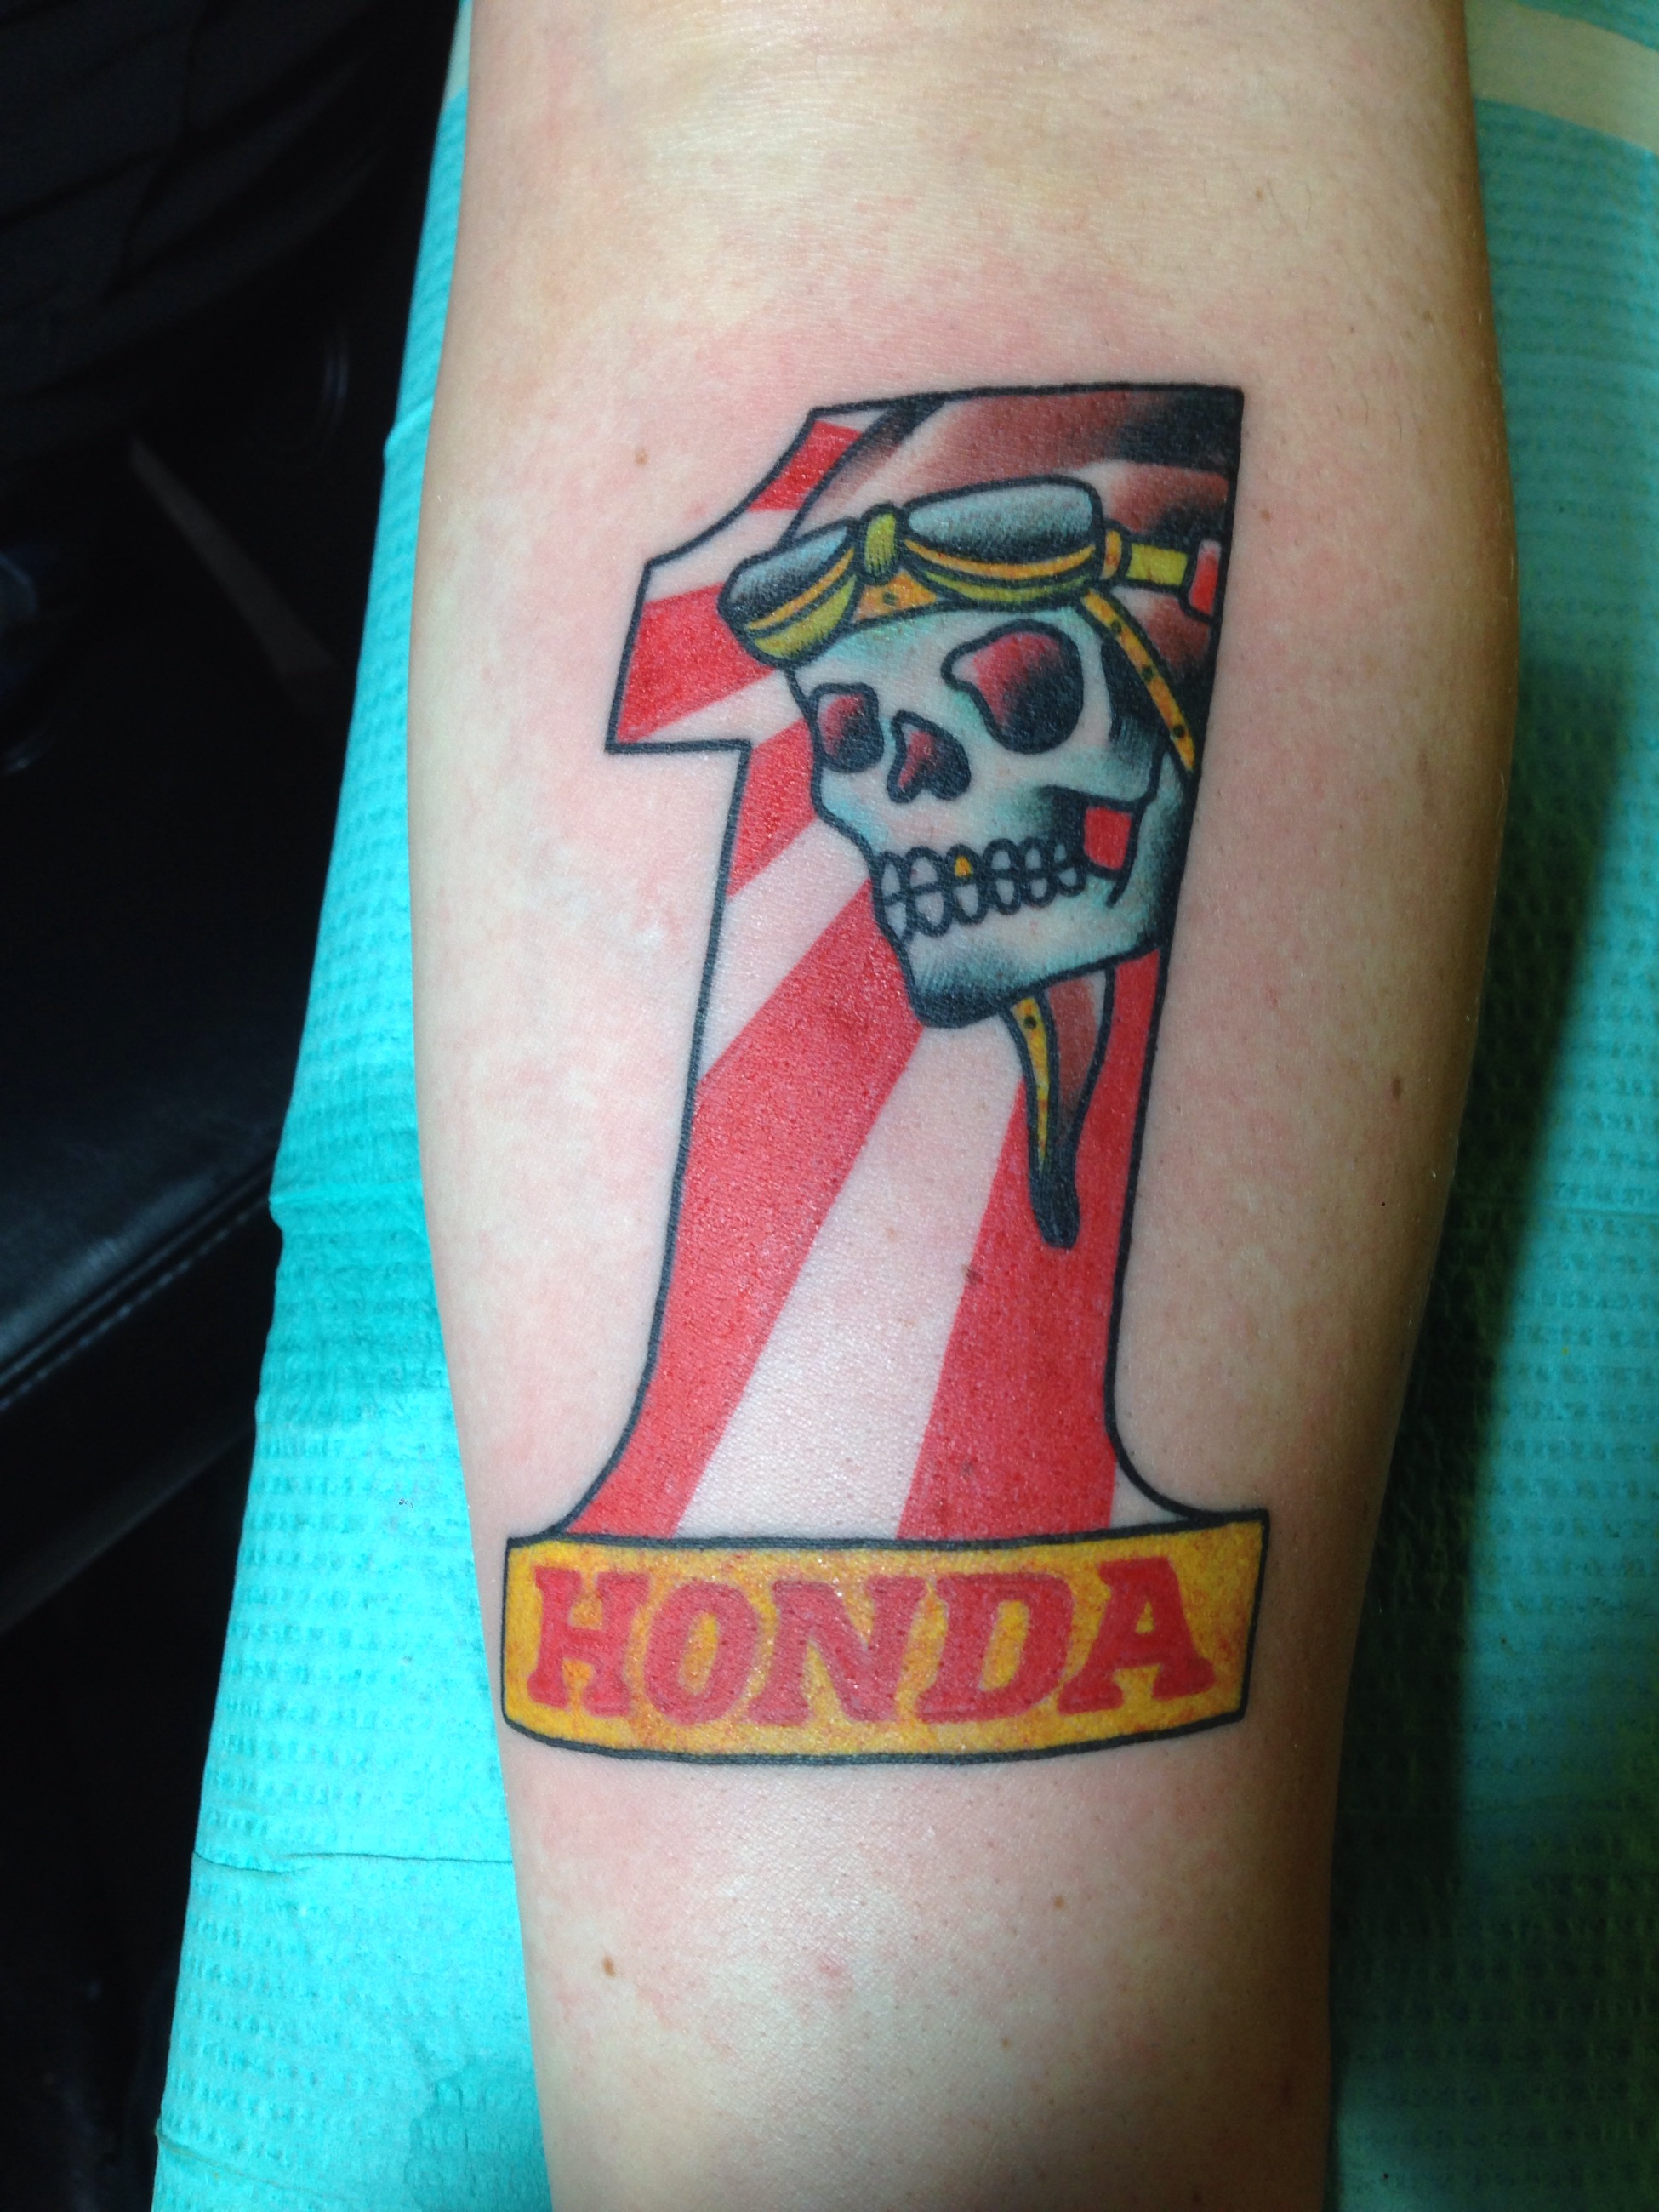 American Traditional Honda 1. Japanese motorcycle pride tattoo on forearm. 